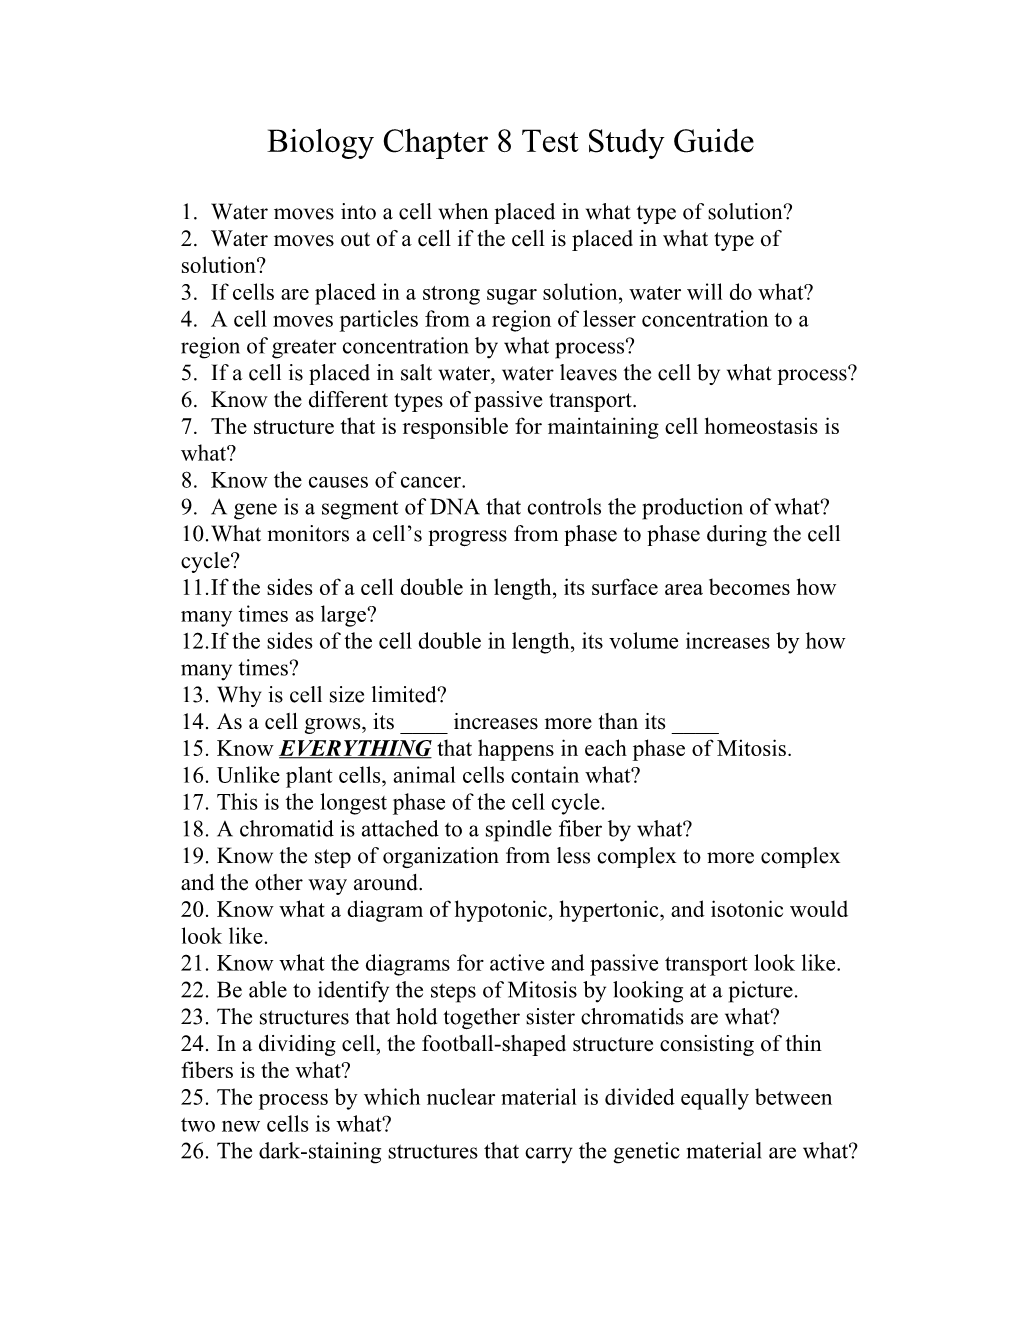 Biology Chapter 8 Test Study Guide